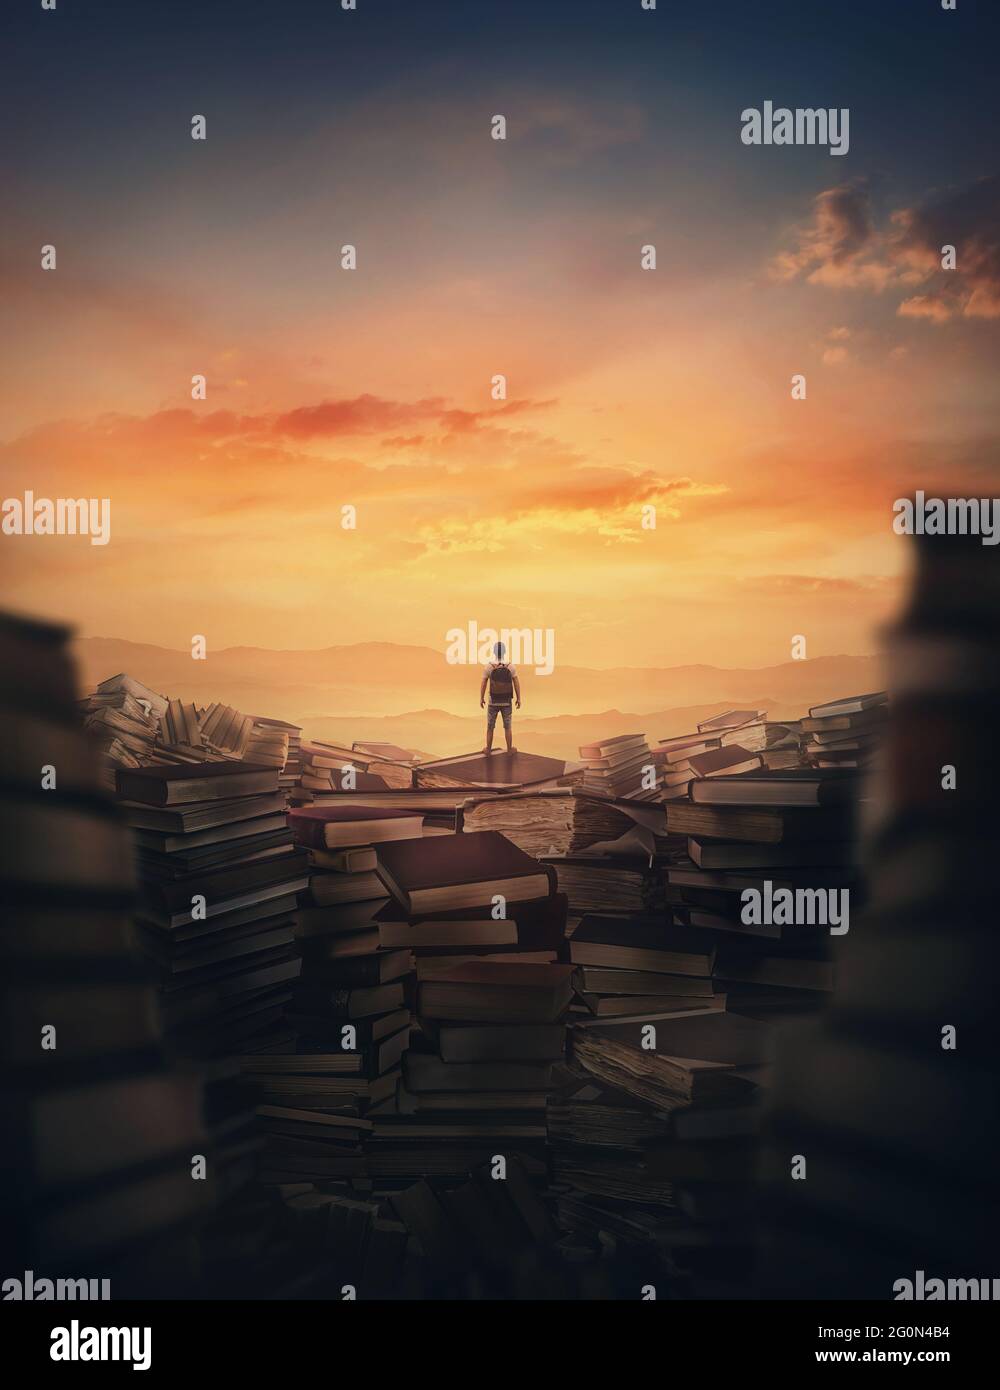 Surrealistic scene with a tiny man climbing on the top of a huge books landfill. Different thrown book piles and a person silhouette against sunset. E Stock Photo